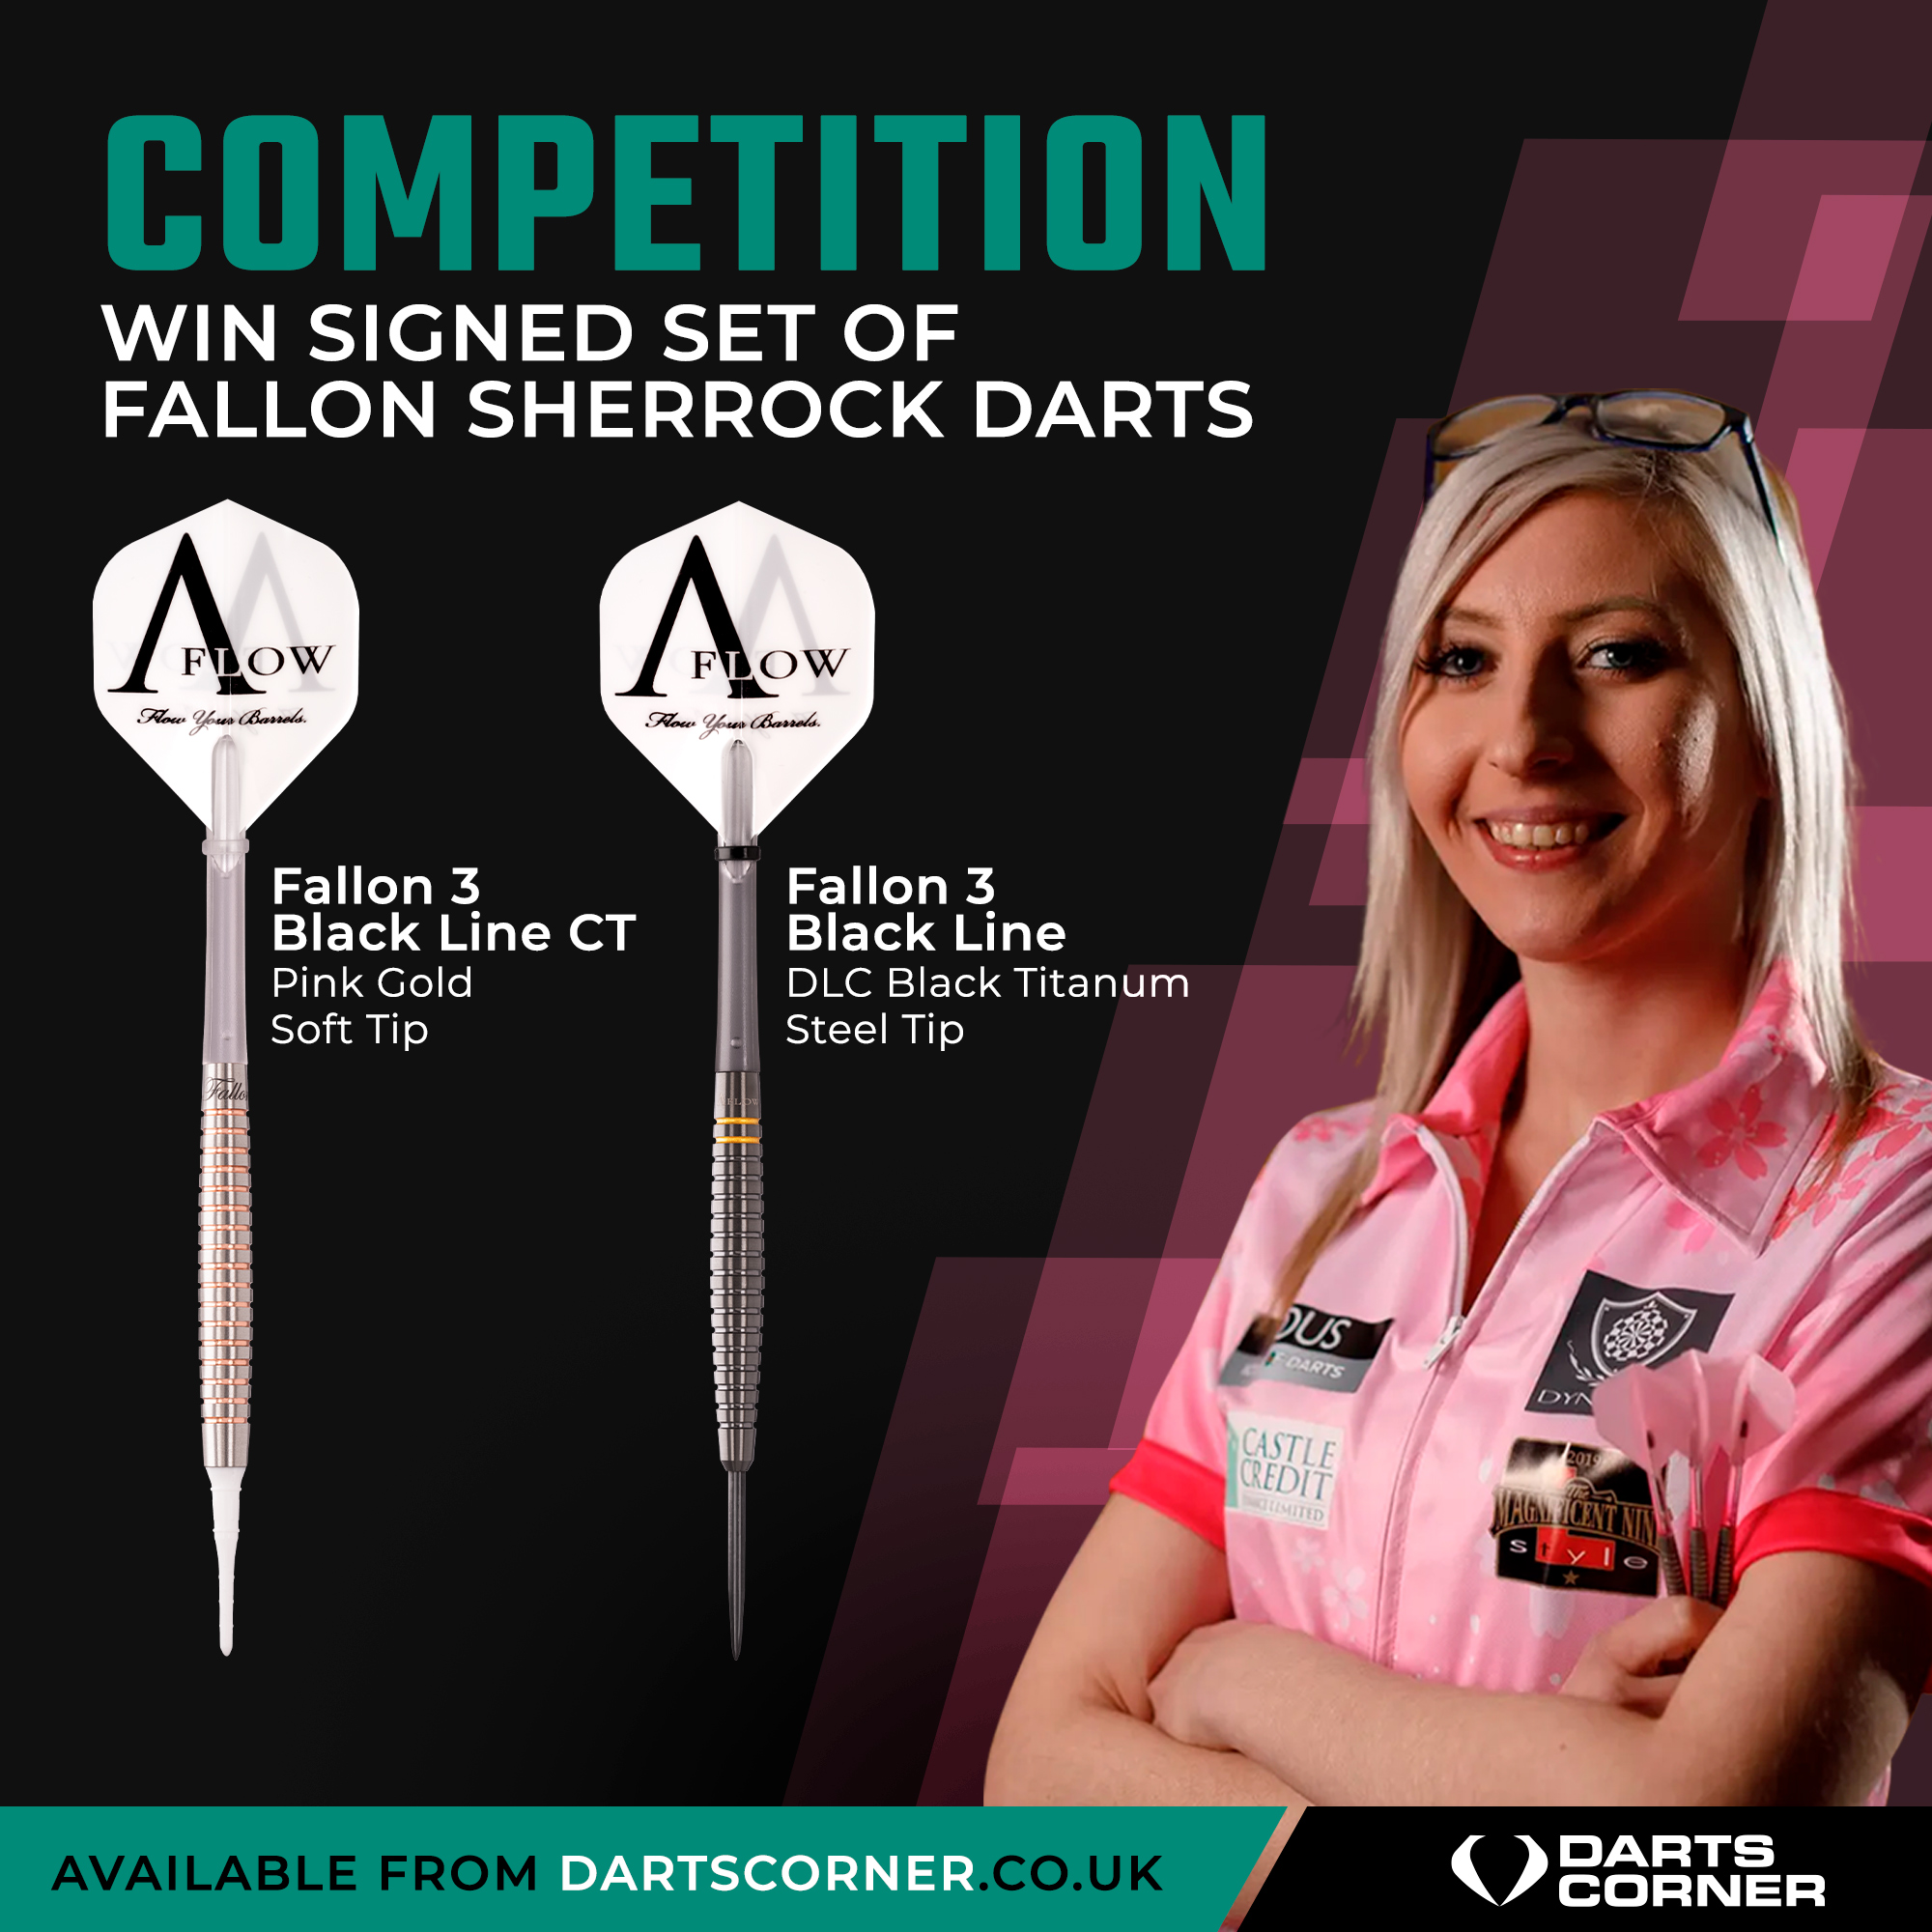 Darts Corner on Twitter: WIN signed Darts for Women's weekend! To enter, like, RT &amp; comment if you'd like to win soft-tip or steel-tip darts! Tag your friends